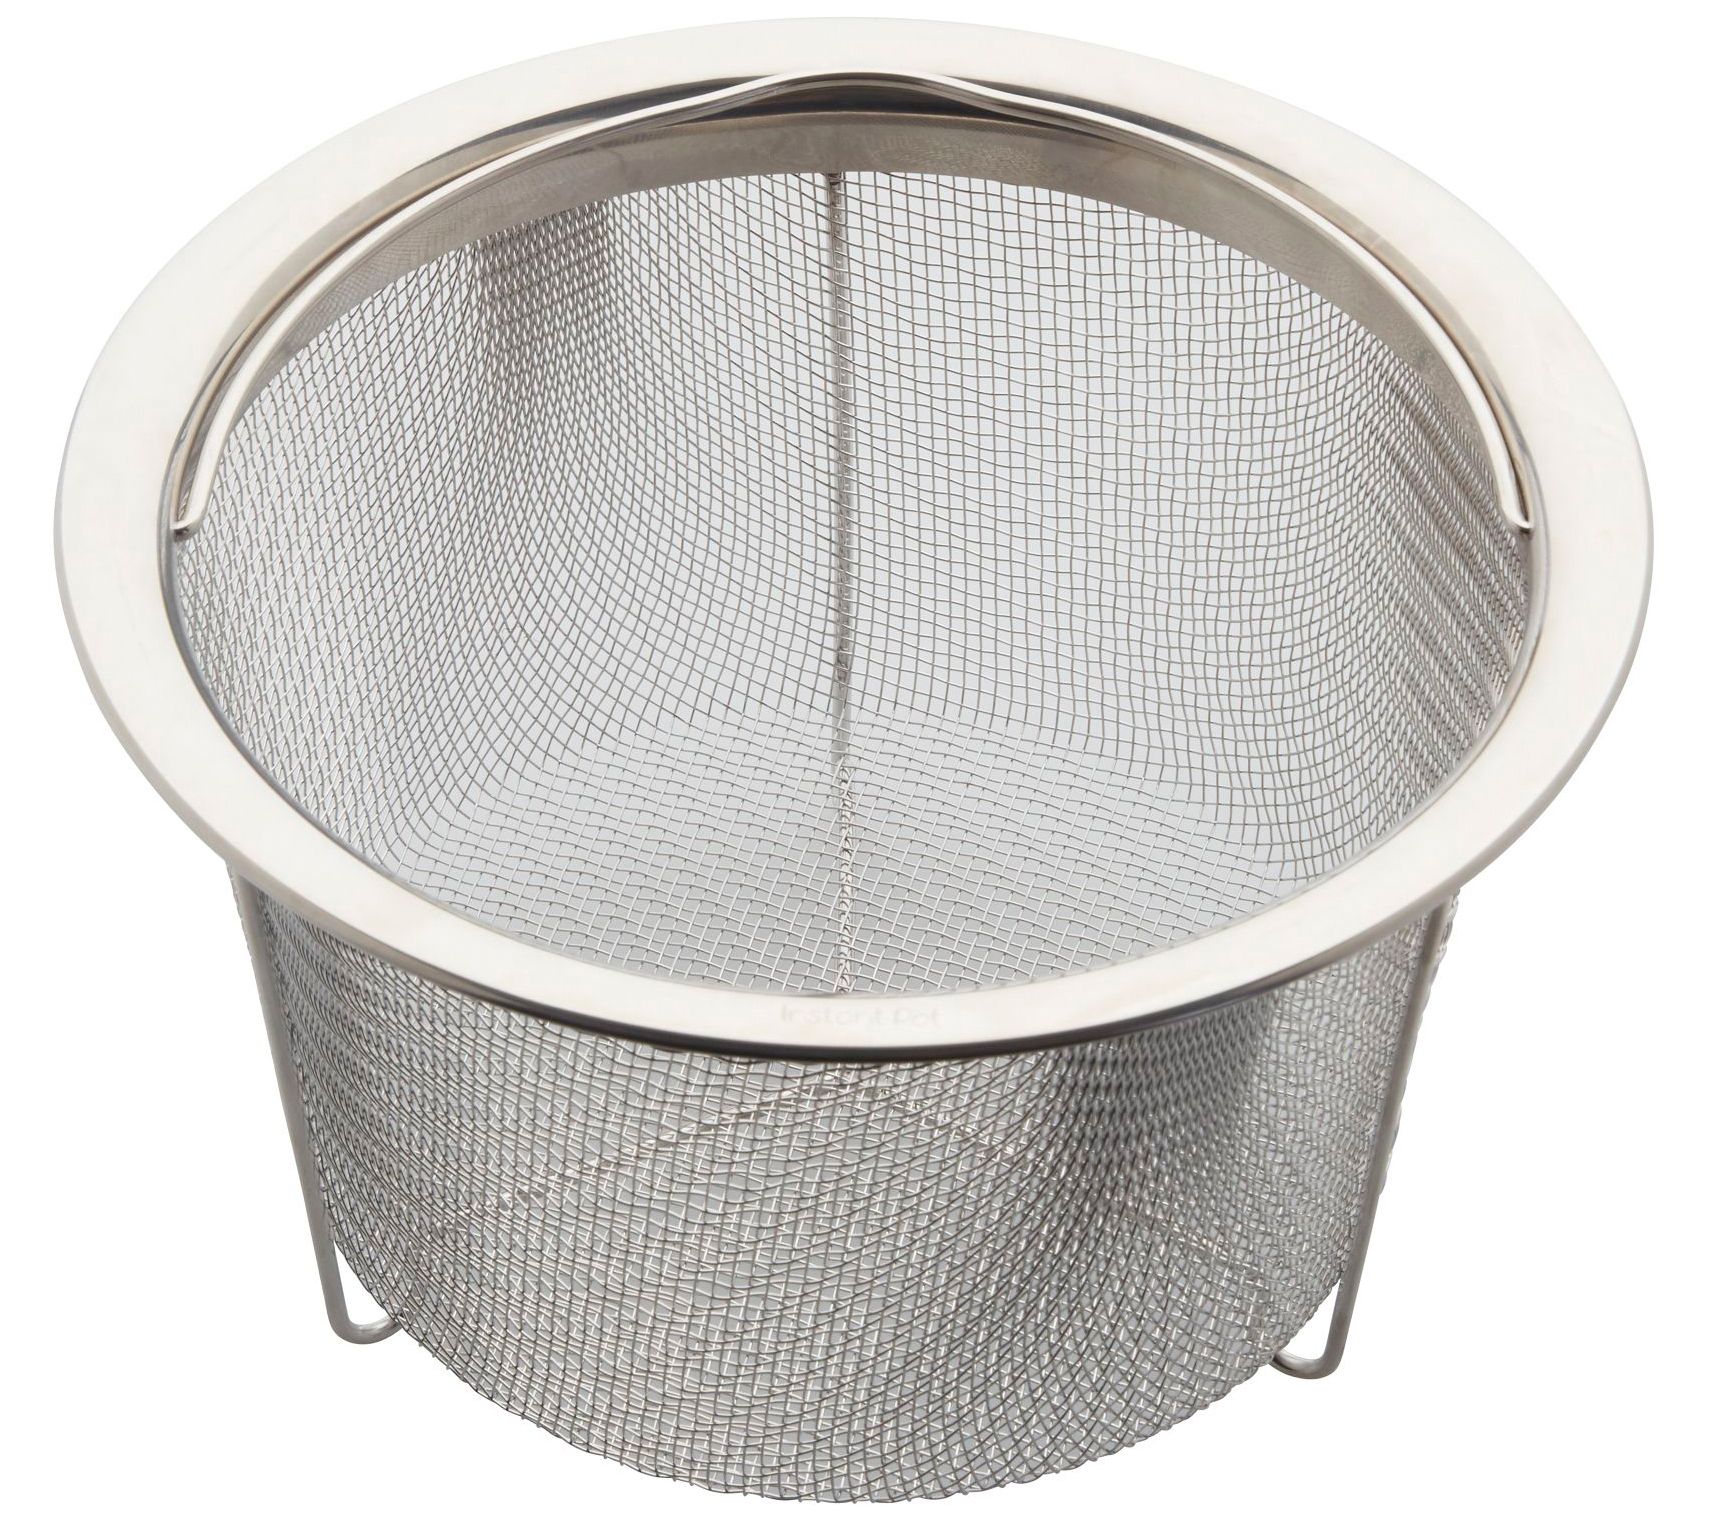 New 6.5qt stainless steel pot for ninja foodie - ecay